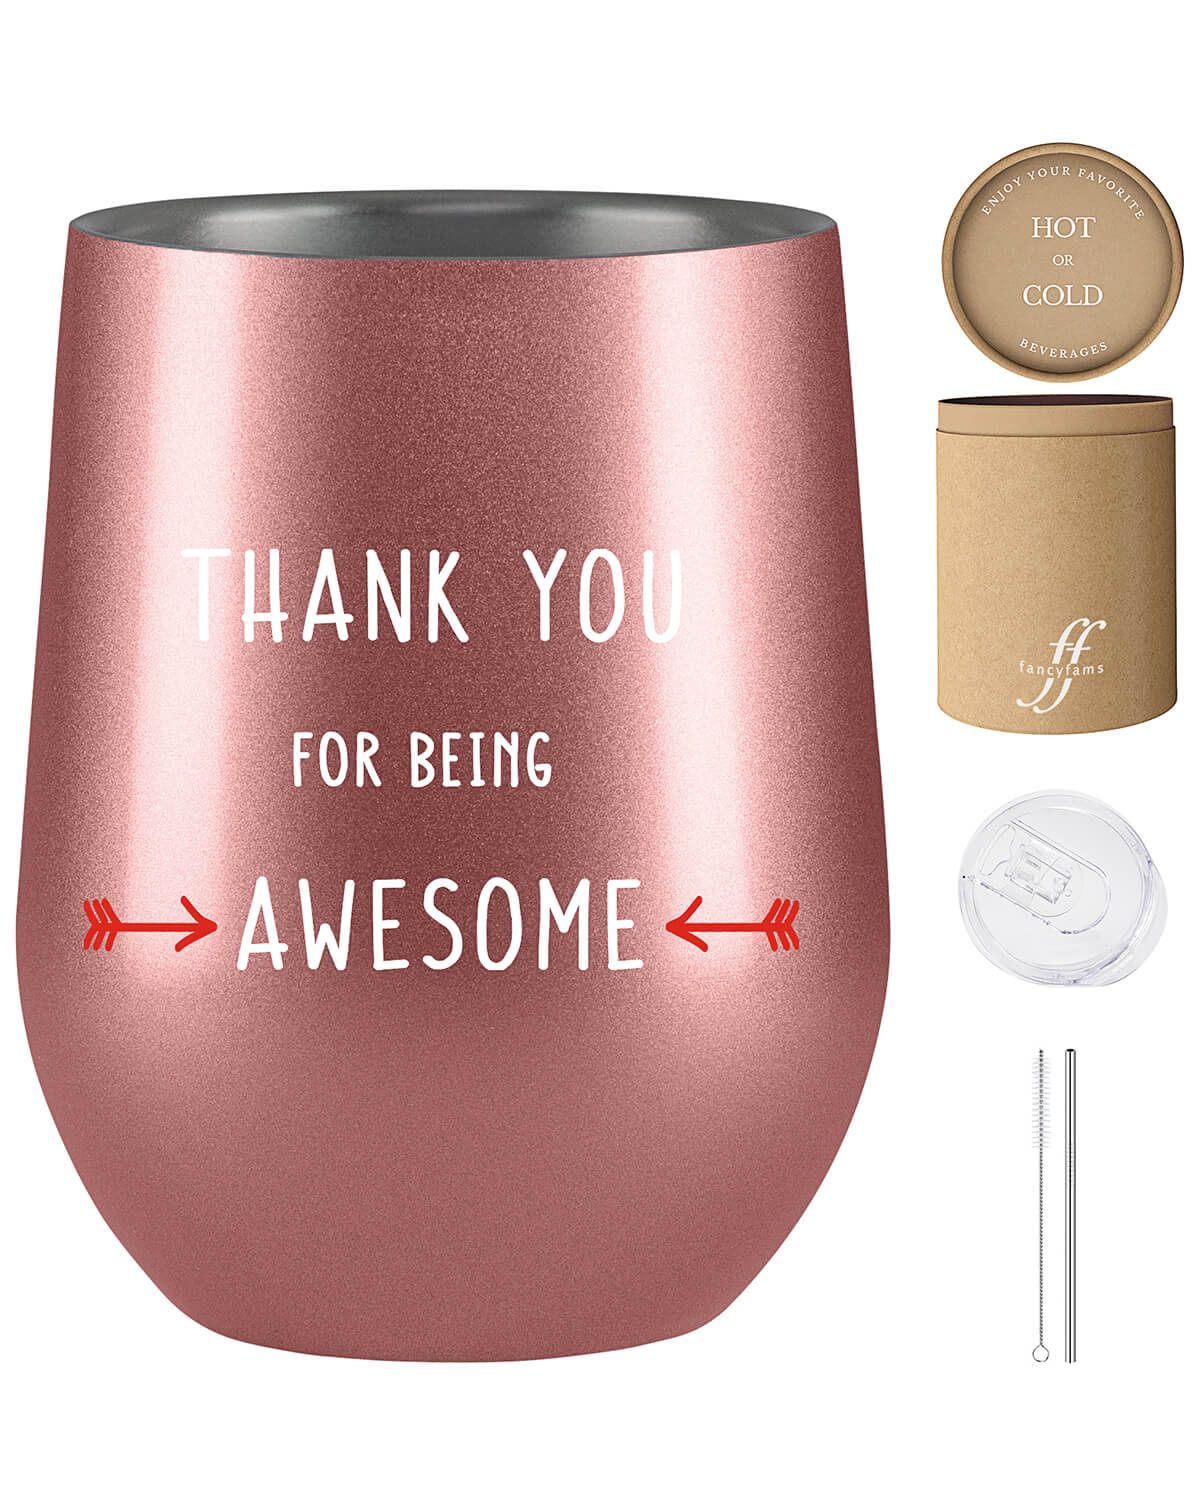 Appreciation Tumbler: &#39;Thank You for Being Awesome&#39; 12 oz Stainless Steel Cup as a Thank You Gift - fancyfams